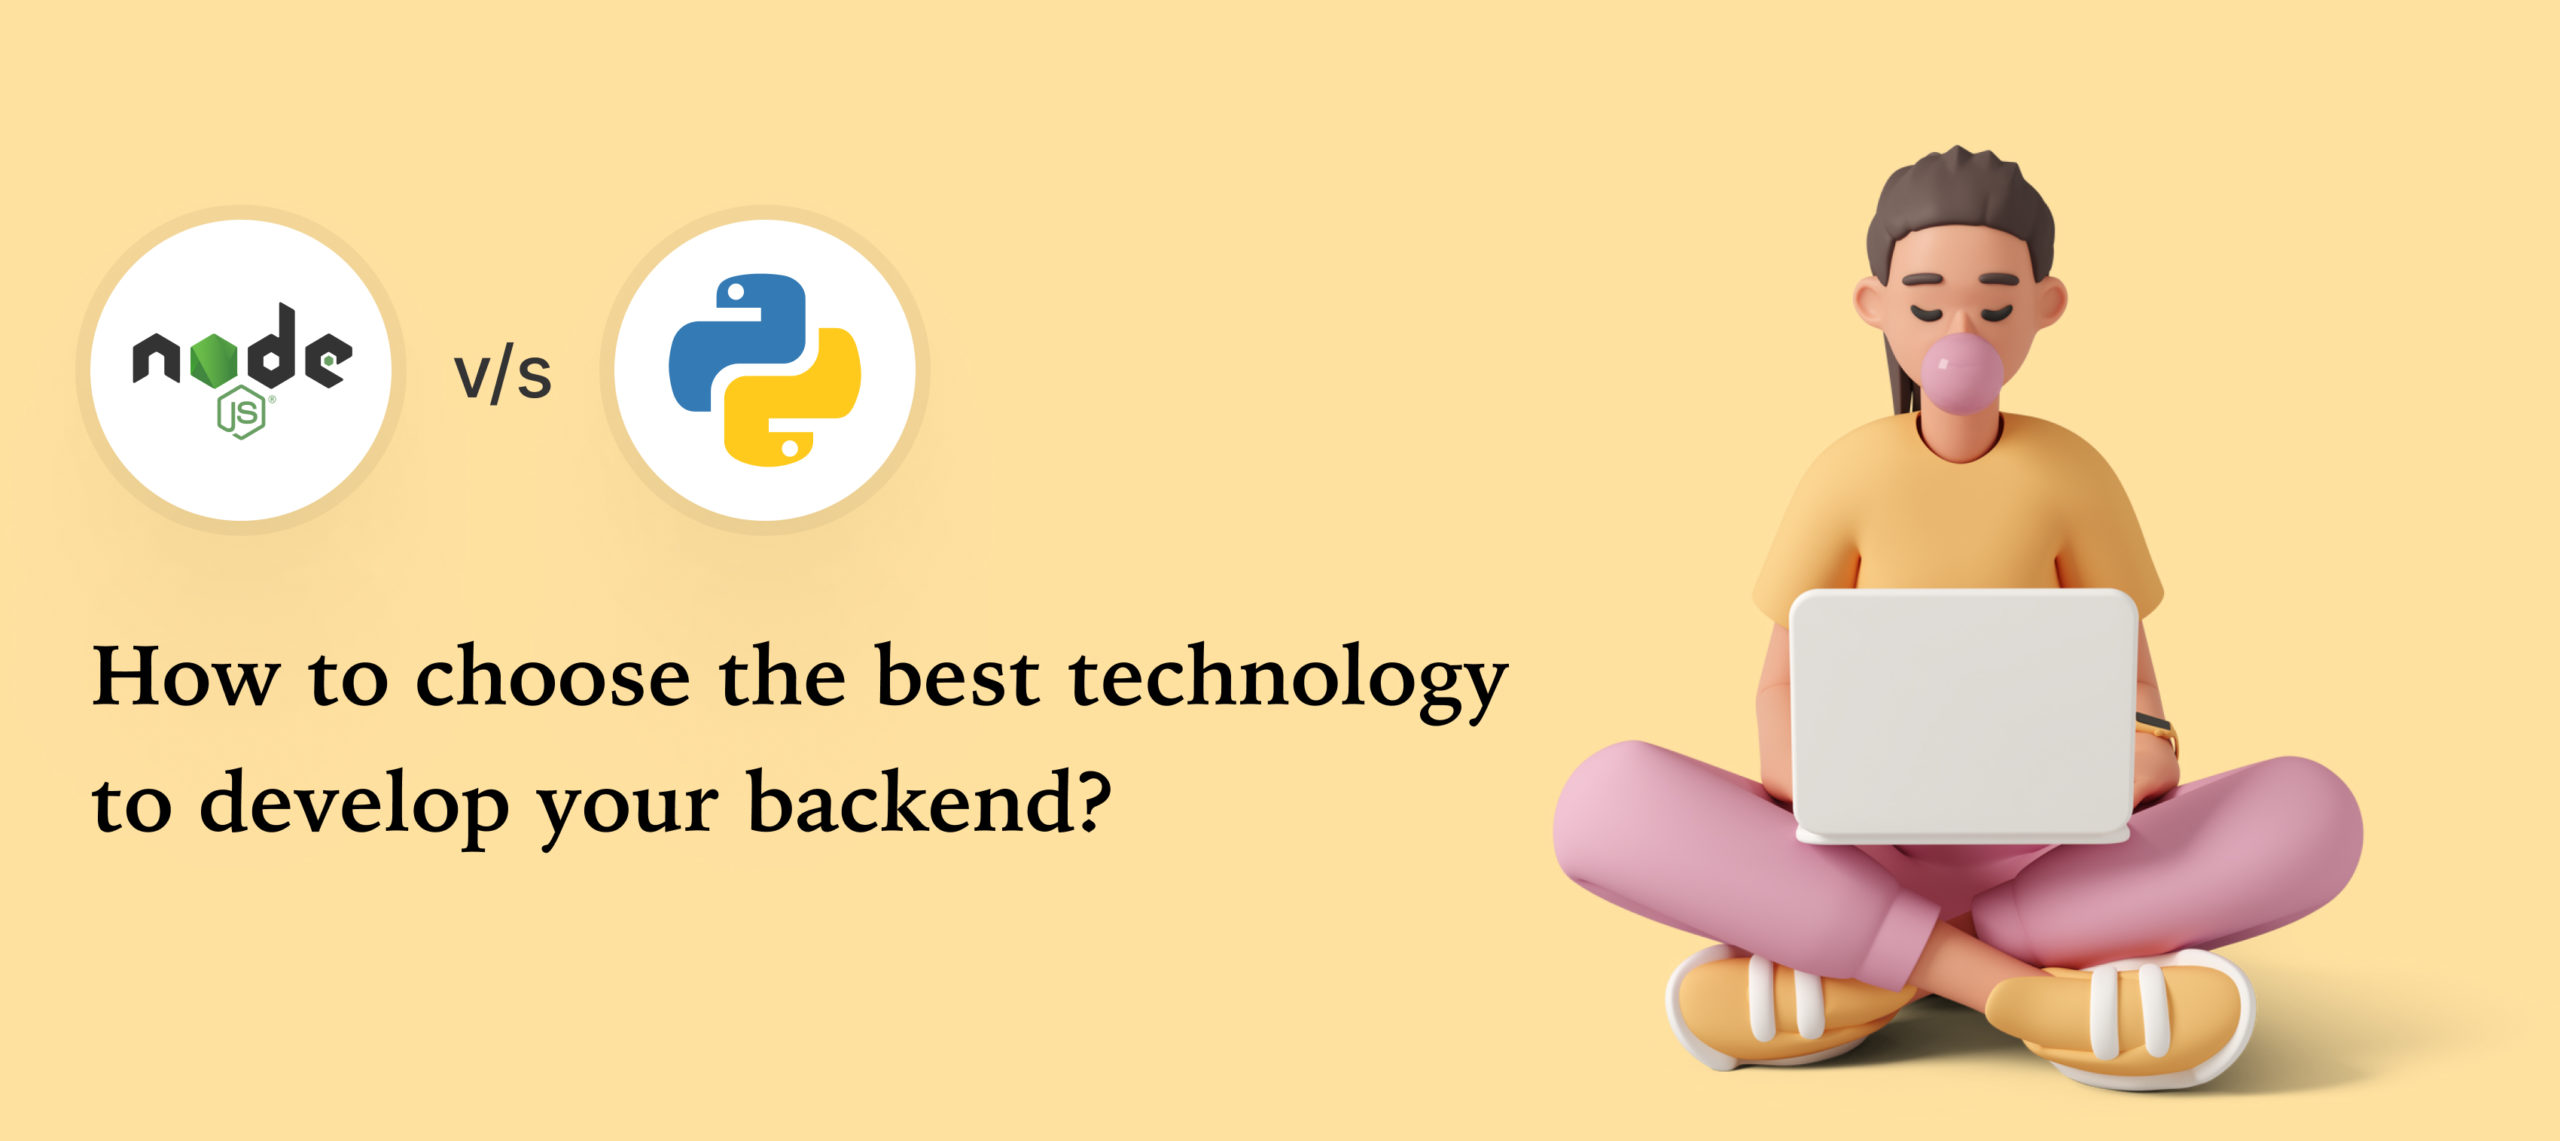  Node.js vs Python- How to Choose Best Technology for Backend